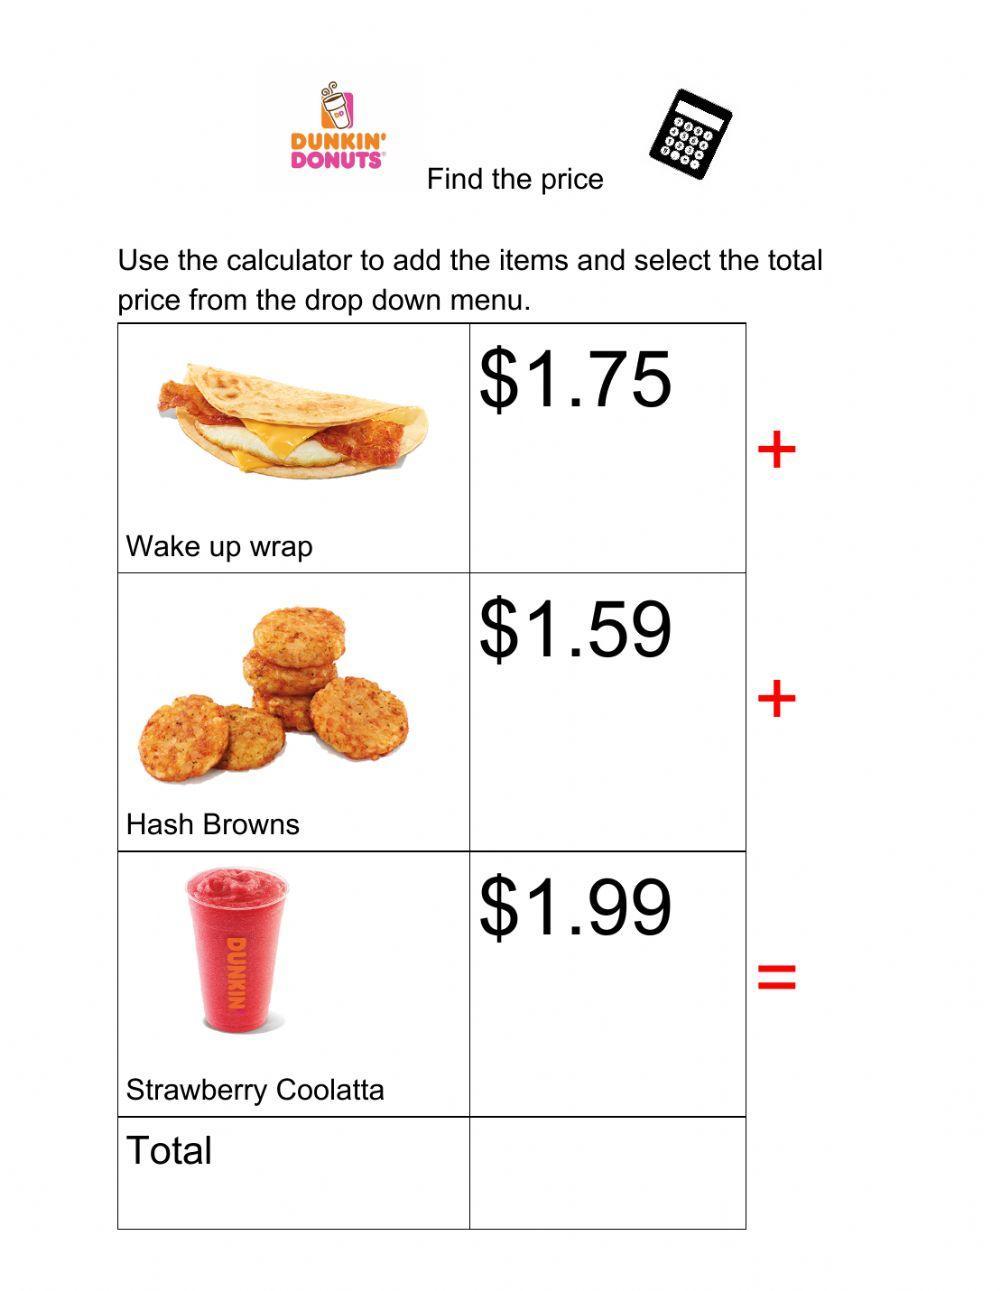 Find the price Dunkin Donuts 6